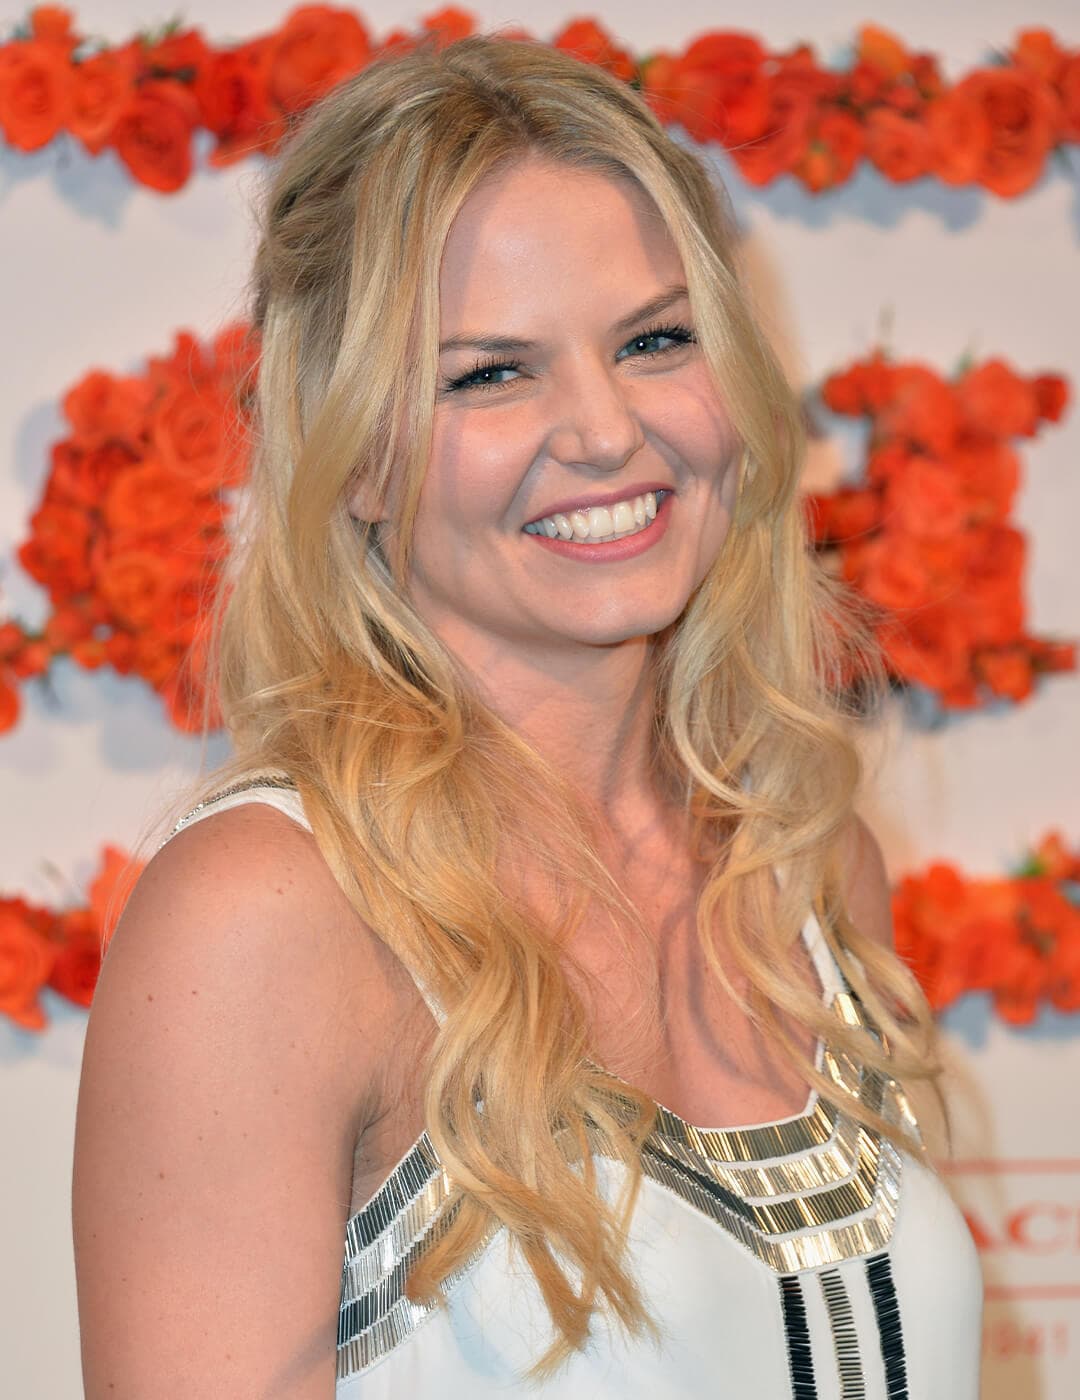 Jennifer Morrison smiling and rocking a half-up waterfall braids hairstyle against a wall of roses